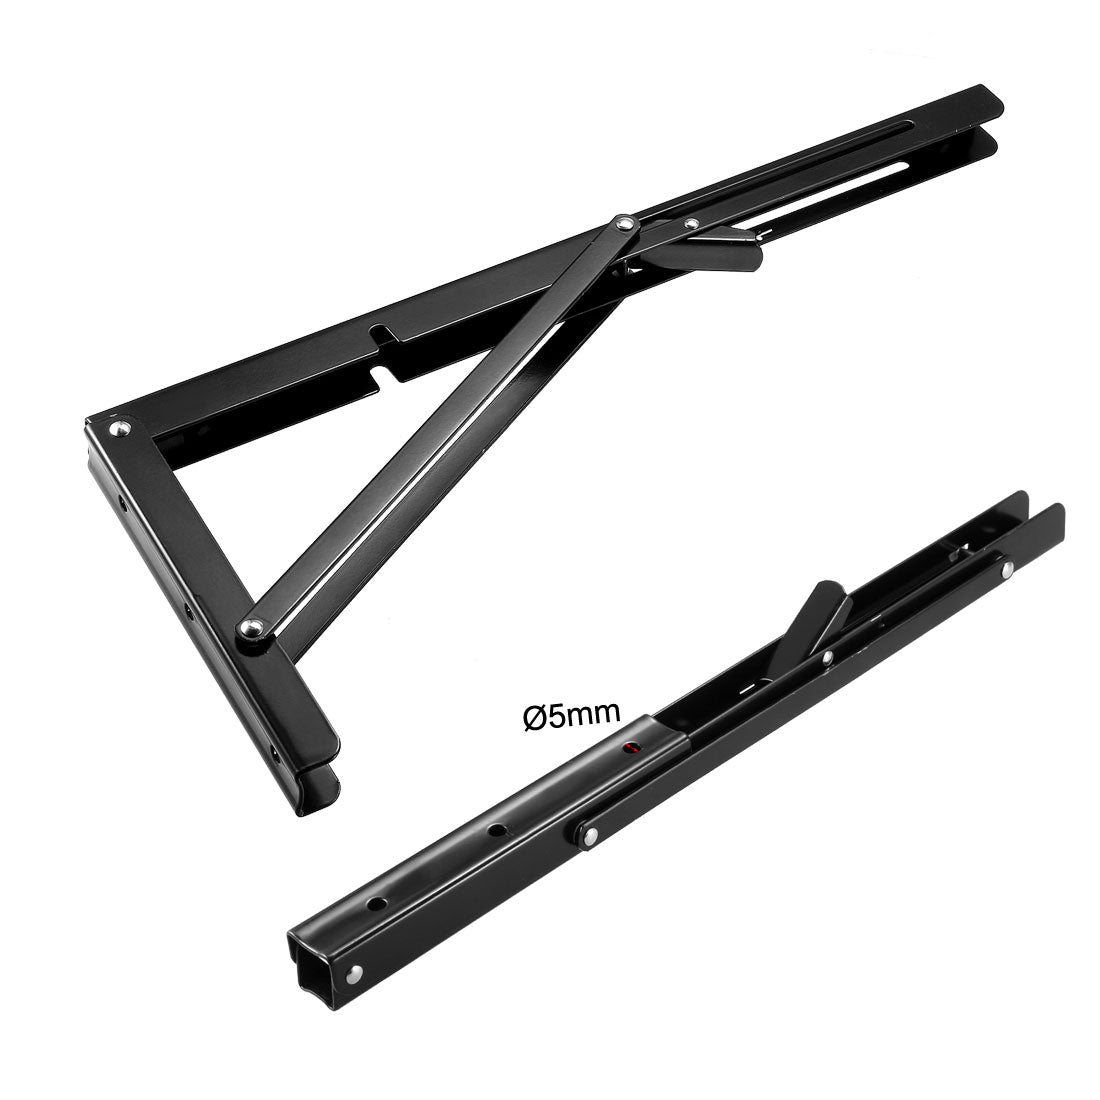 uxcell Uxcell Folding Bracket 16 inch 400mm for Shelves Table Desk Wall Mounted Support Collapsible Long Release Arm Space Saving Carbon Steel 2pcs